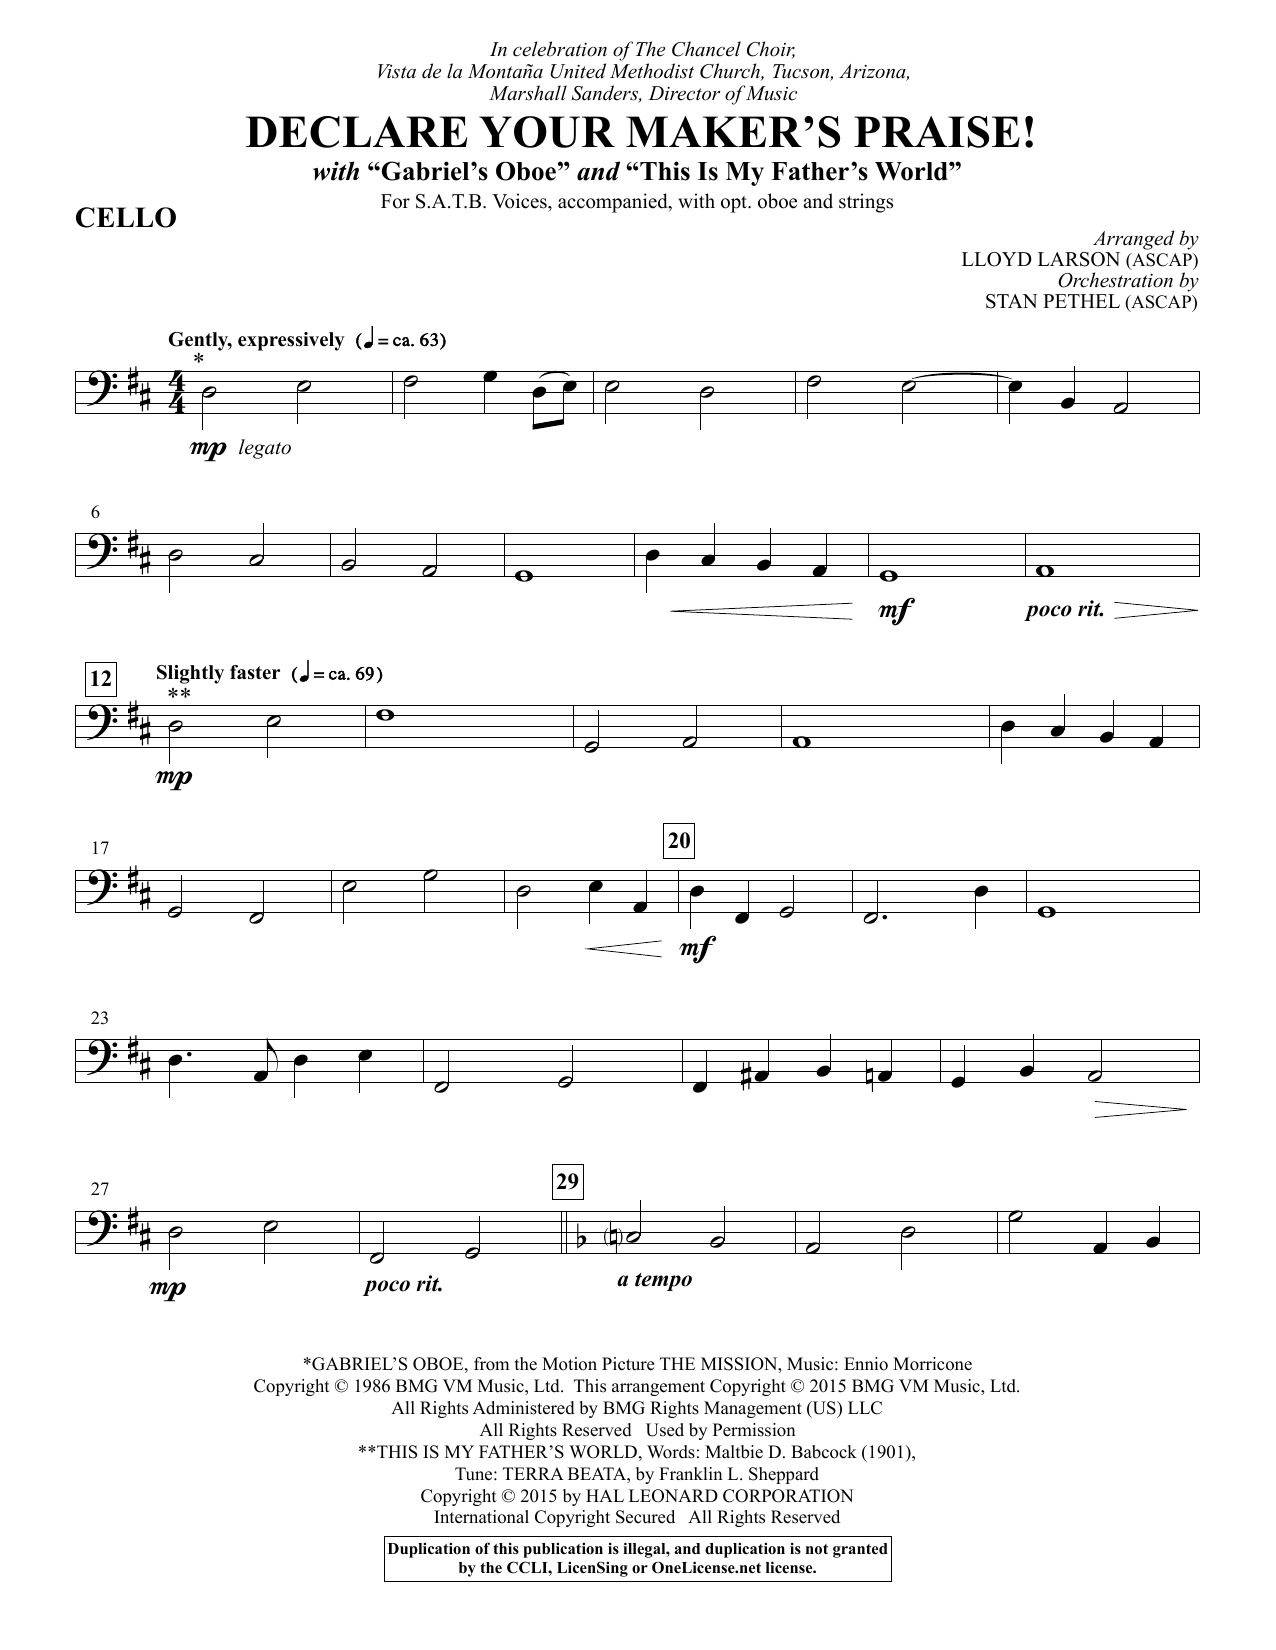 Lloyd Larson Declare Your Maker's Praise! - Cello sheet music notes and chords. Download Printable PDF.